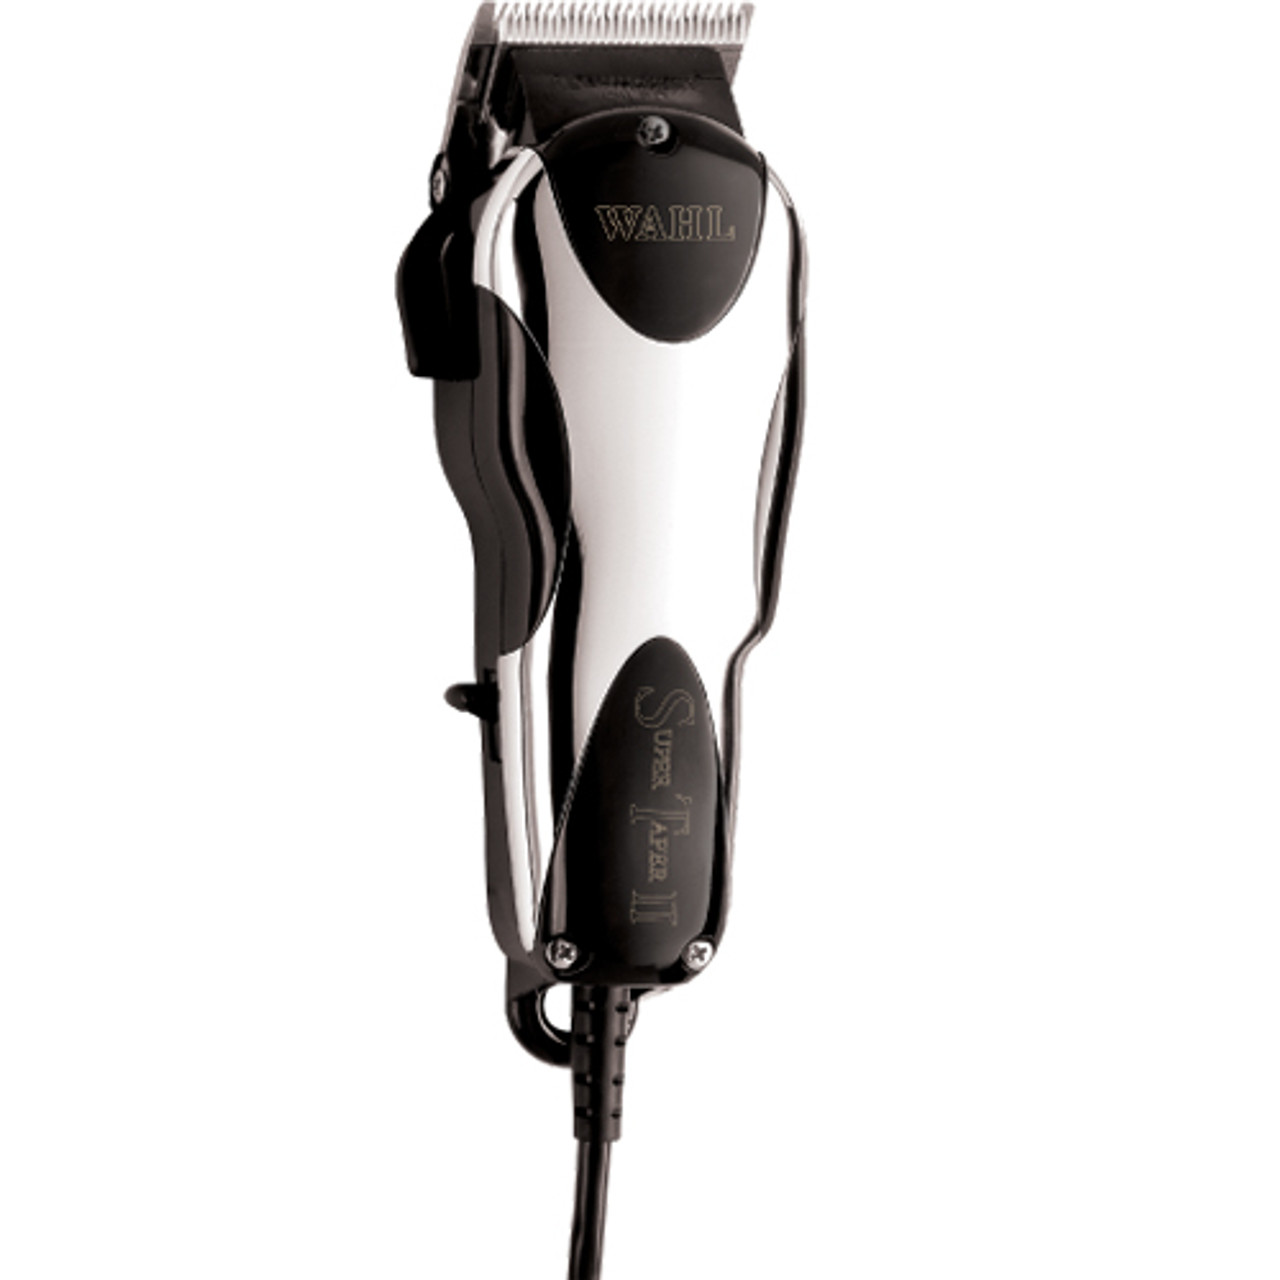 Wahl Professional Adjustable Blade Super Taper 2 Clipper w/ Guides 8470-500